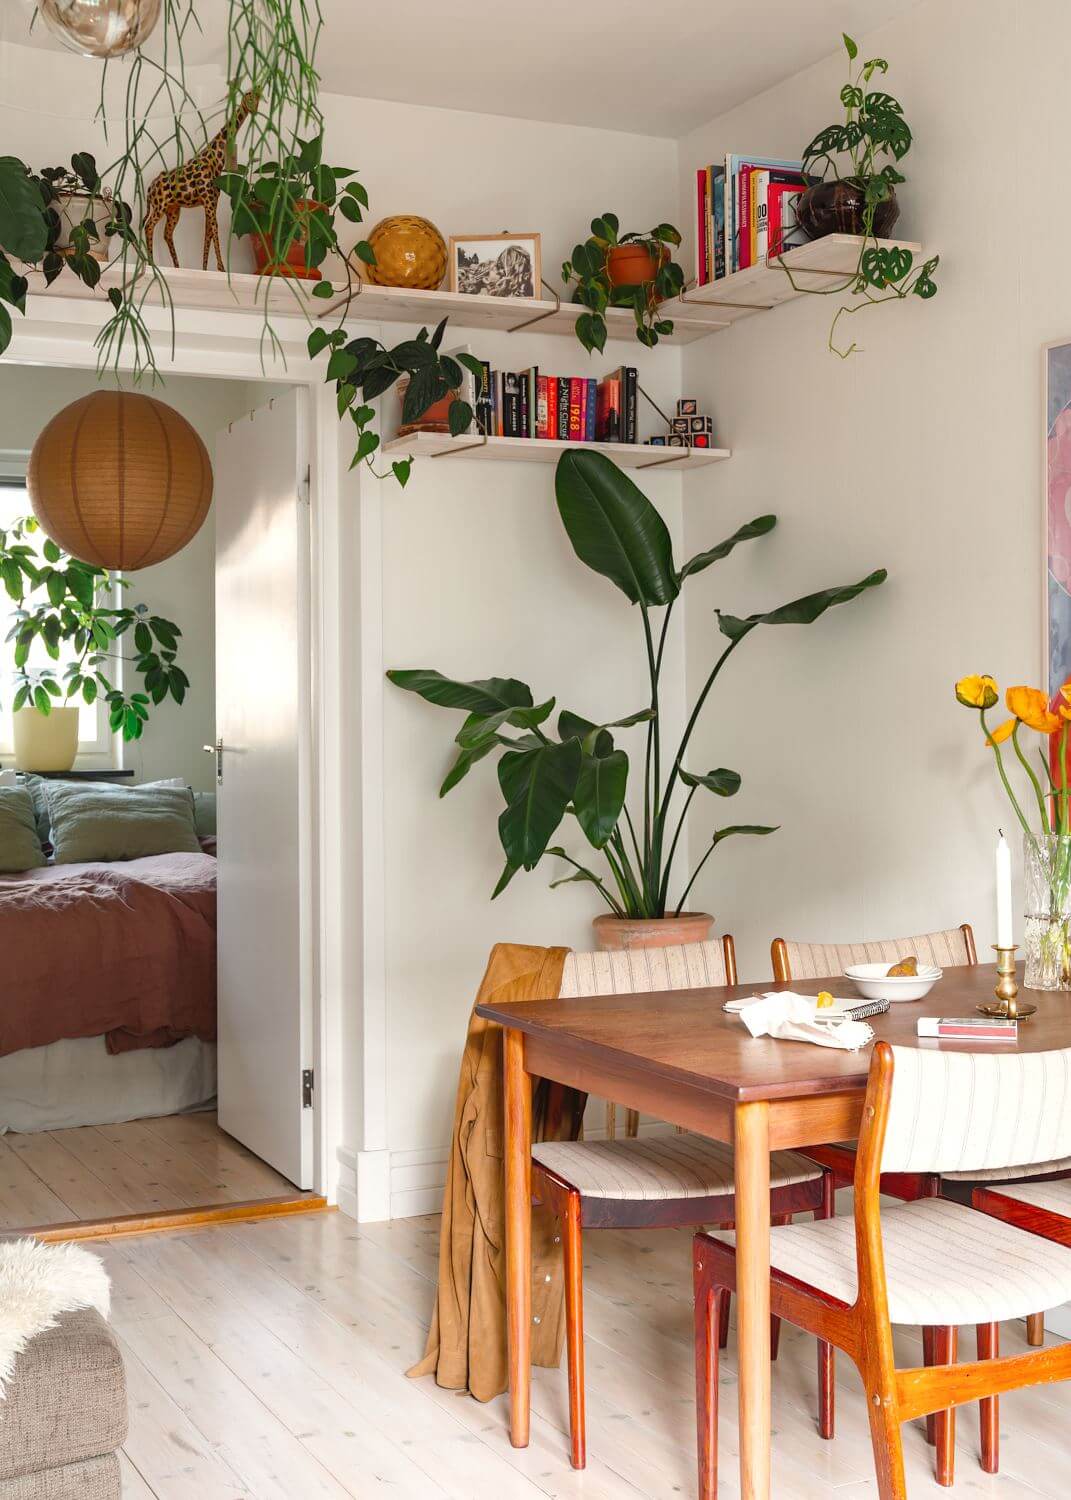 A Small Light Apartment with Plants - The Nordroom